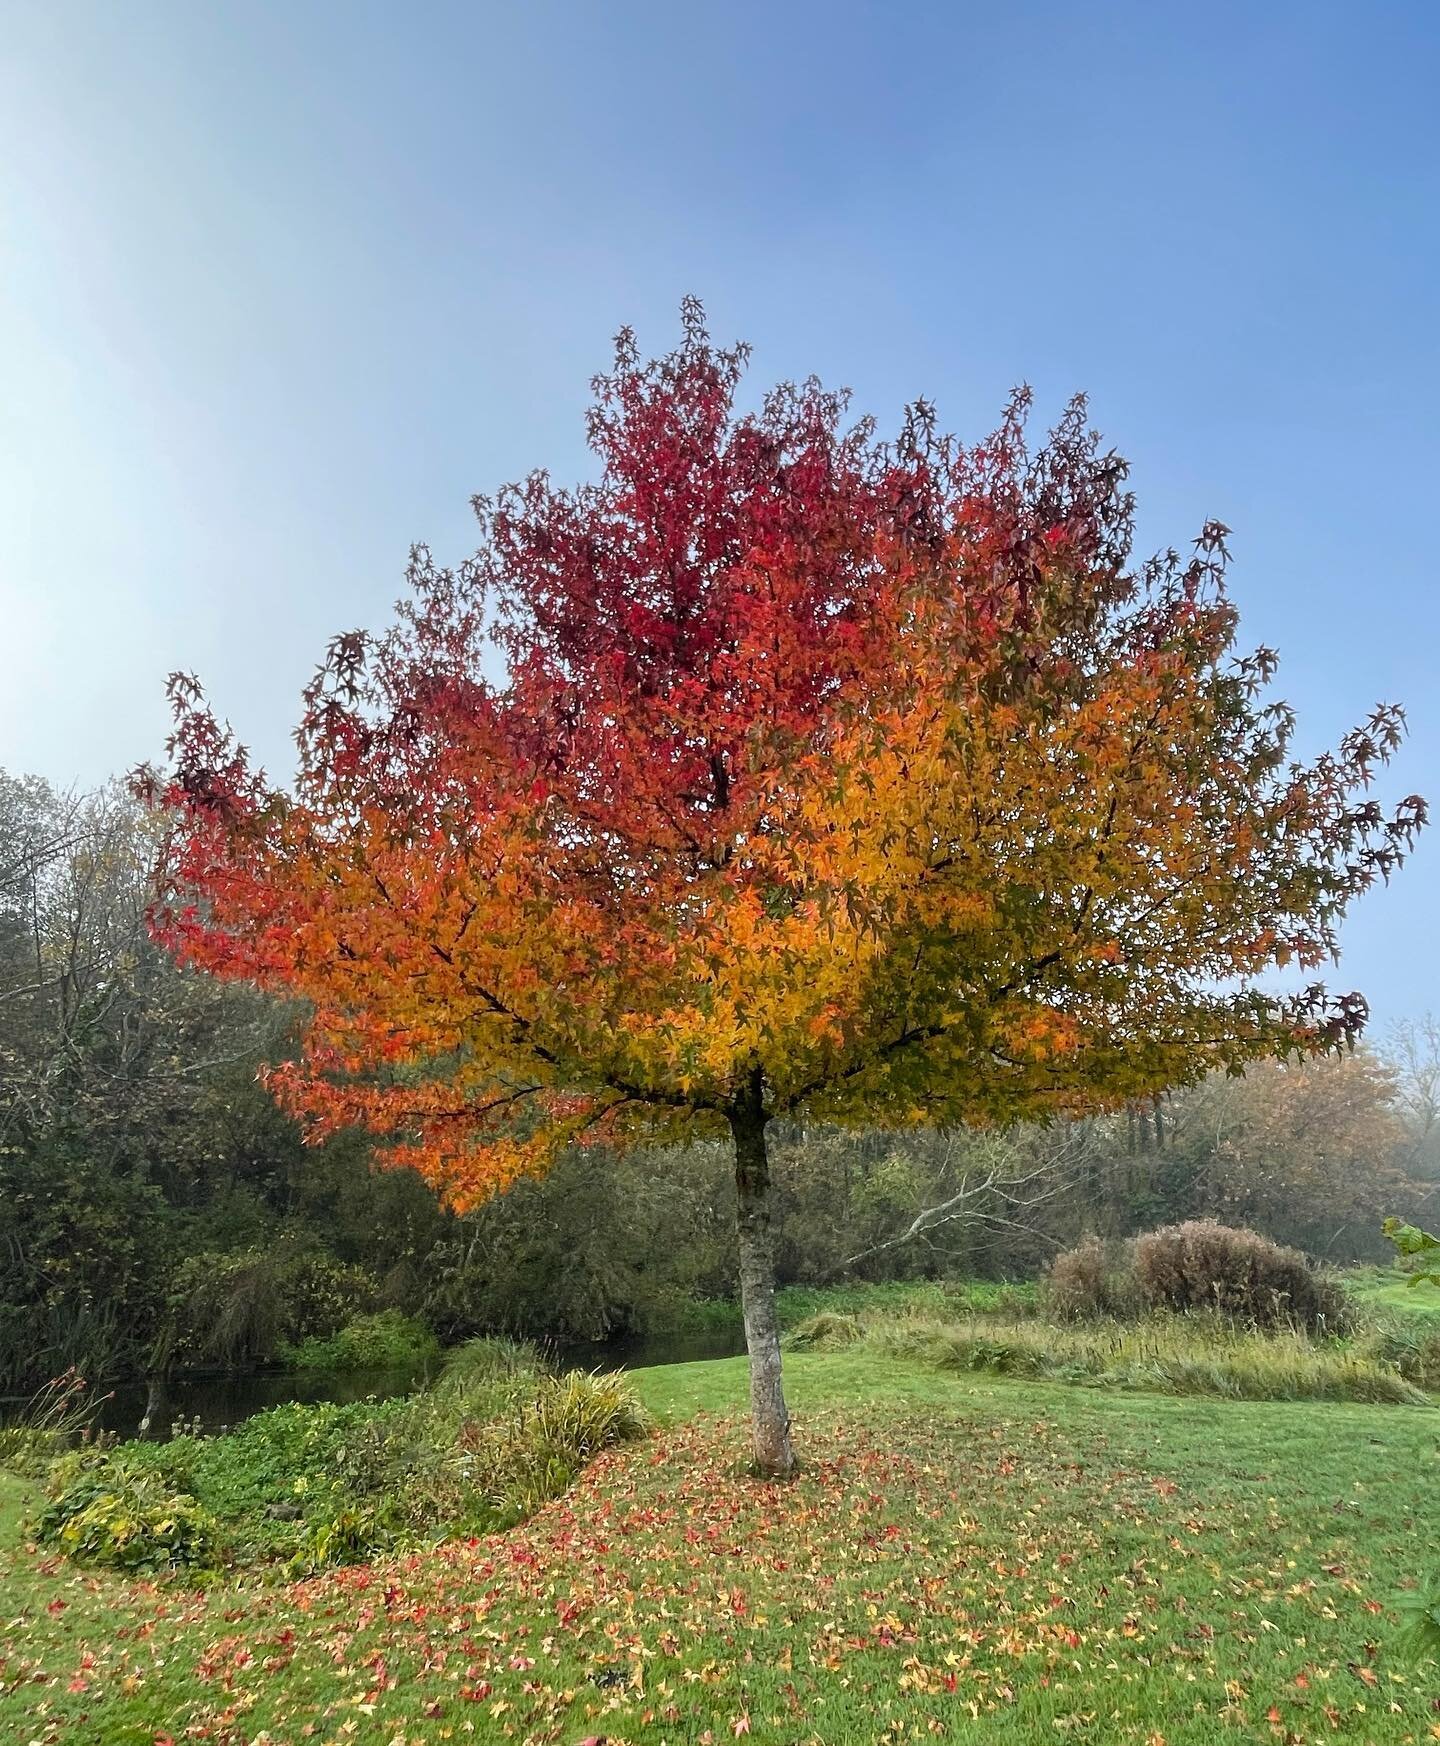 Can&rsquo;t believe it has been 2 years since we last posted this beautiful village tree. Every year it&rsquo;s incredible flame like appearance is a wonderful sight. It also helps that it is located next to the road so is a useful point for directio